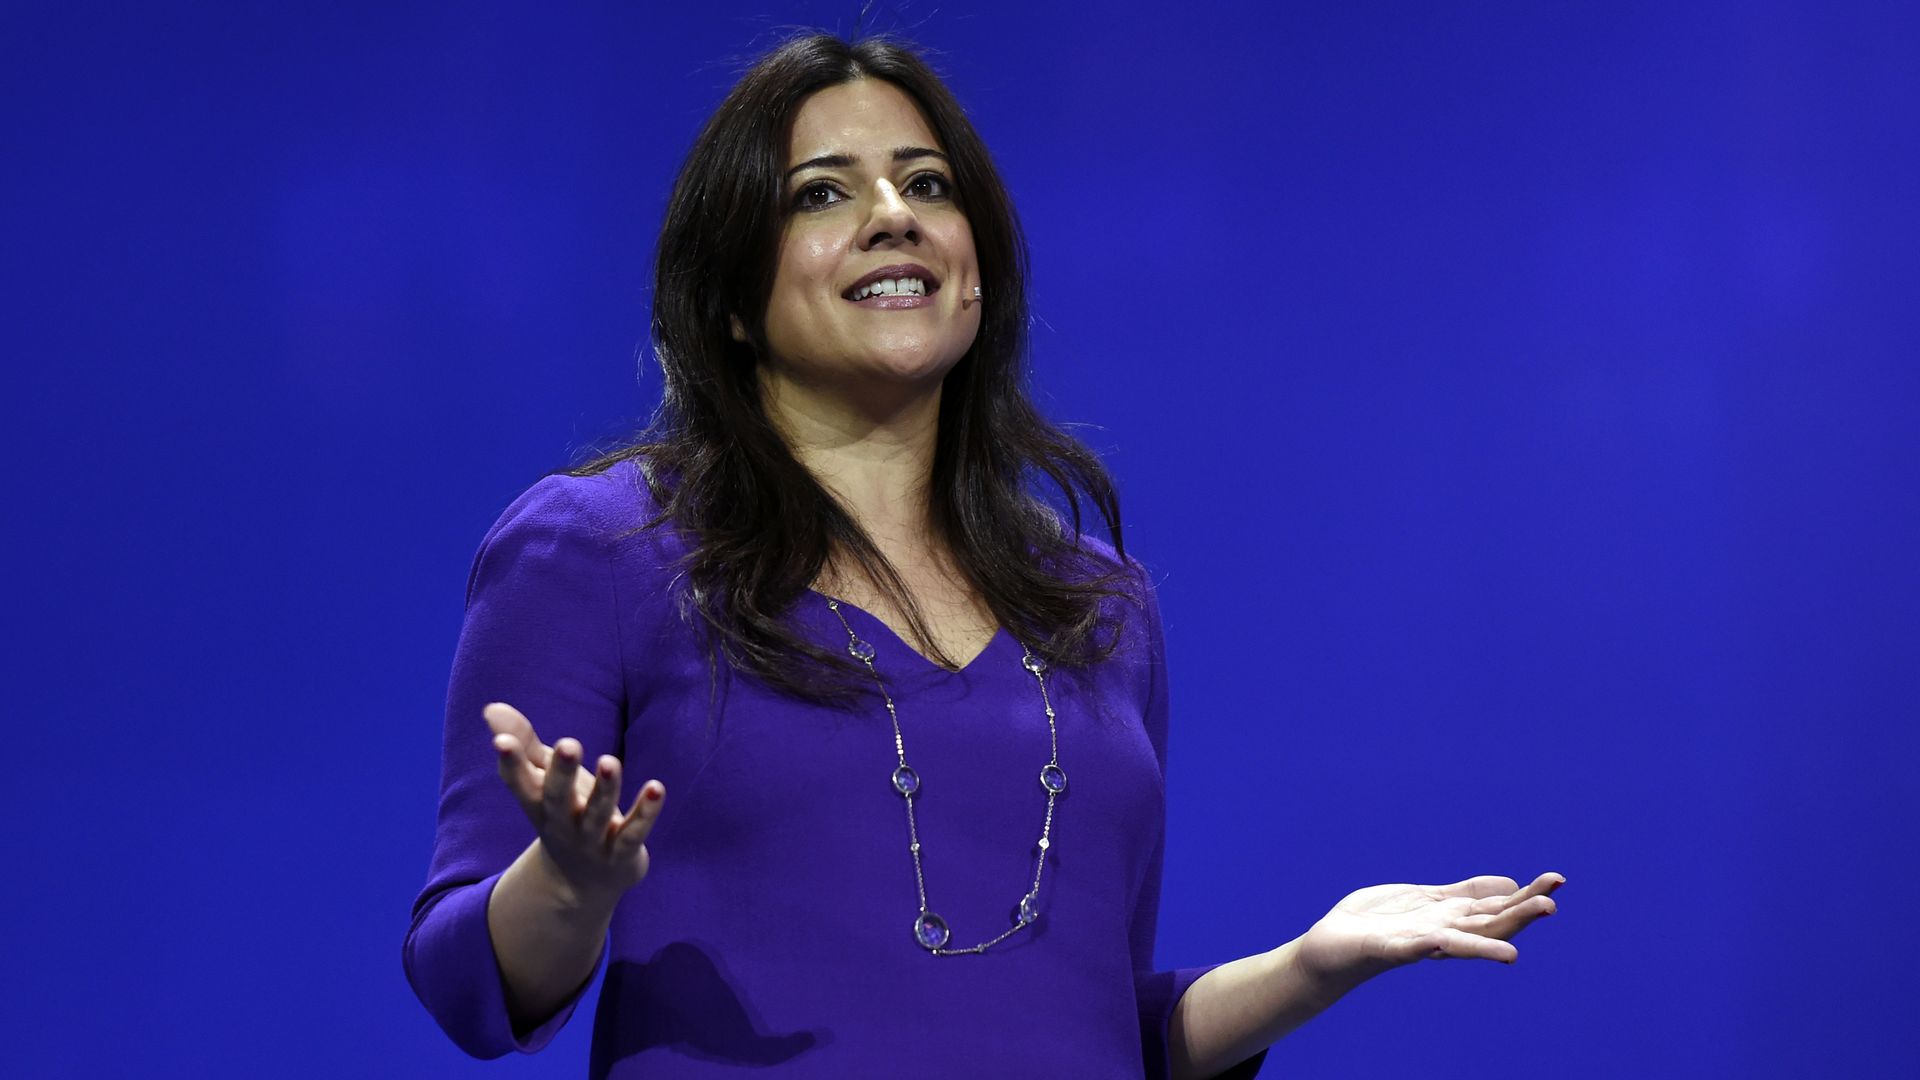 Reshma Saujani giving a speech on stage